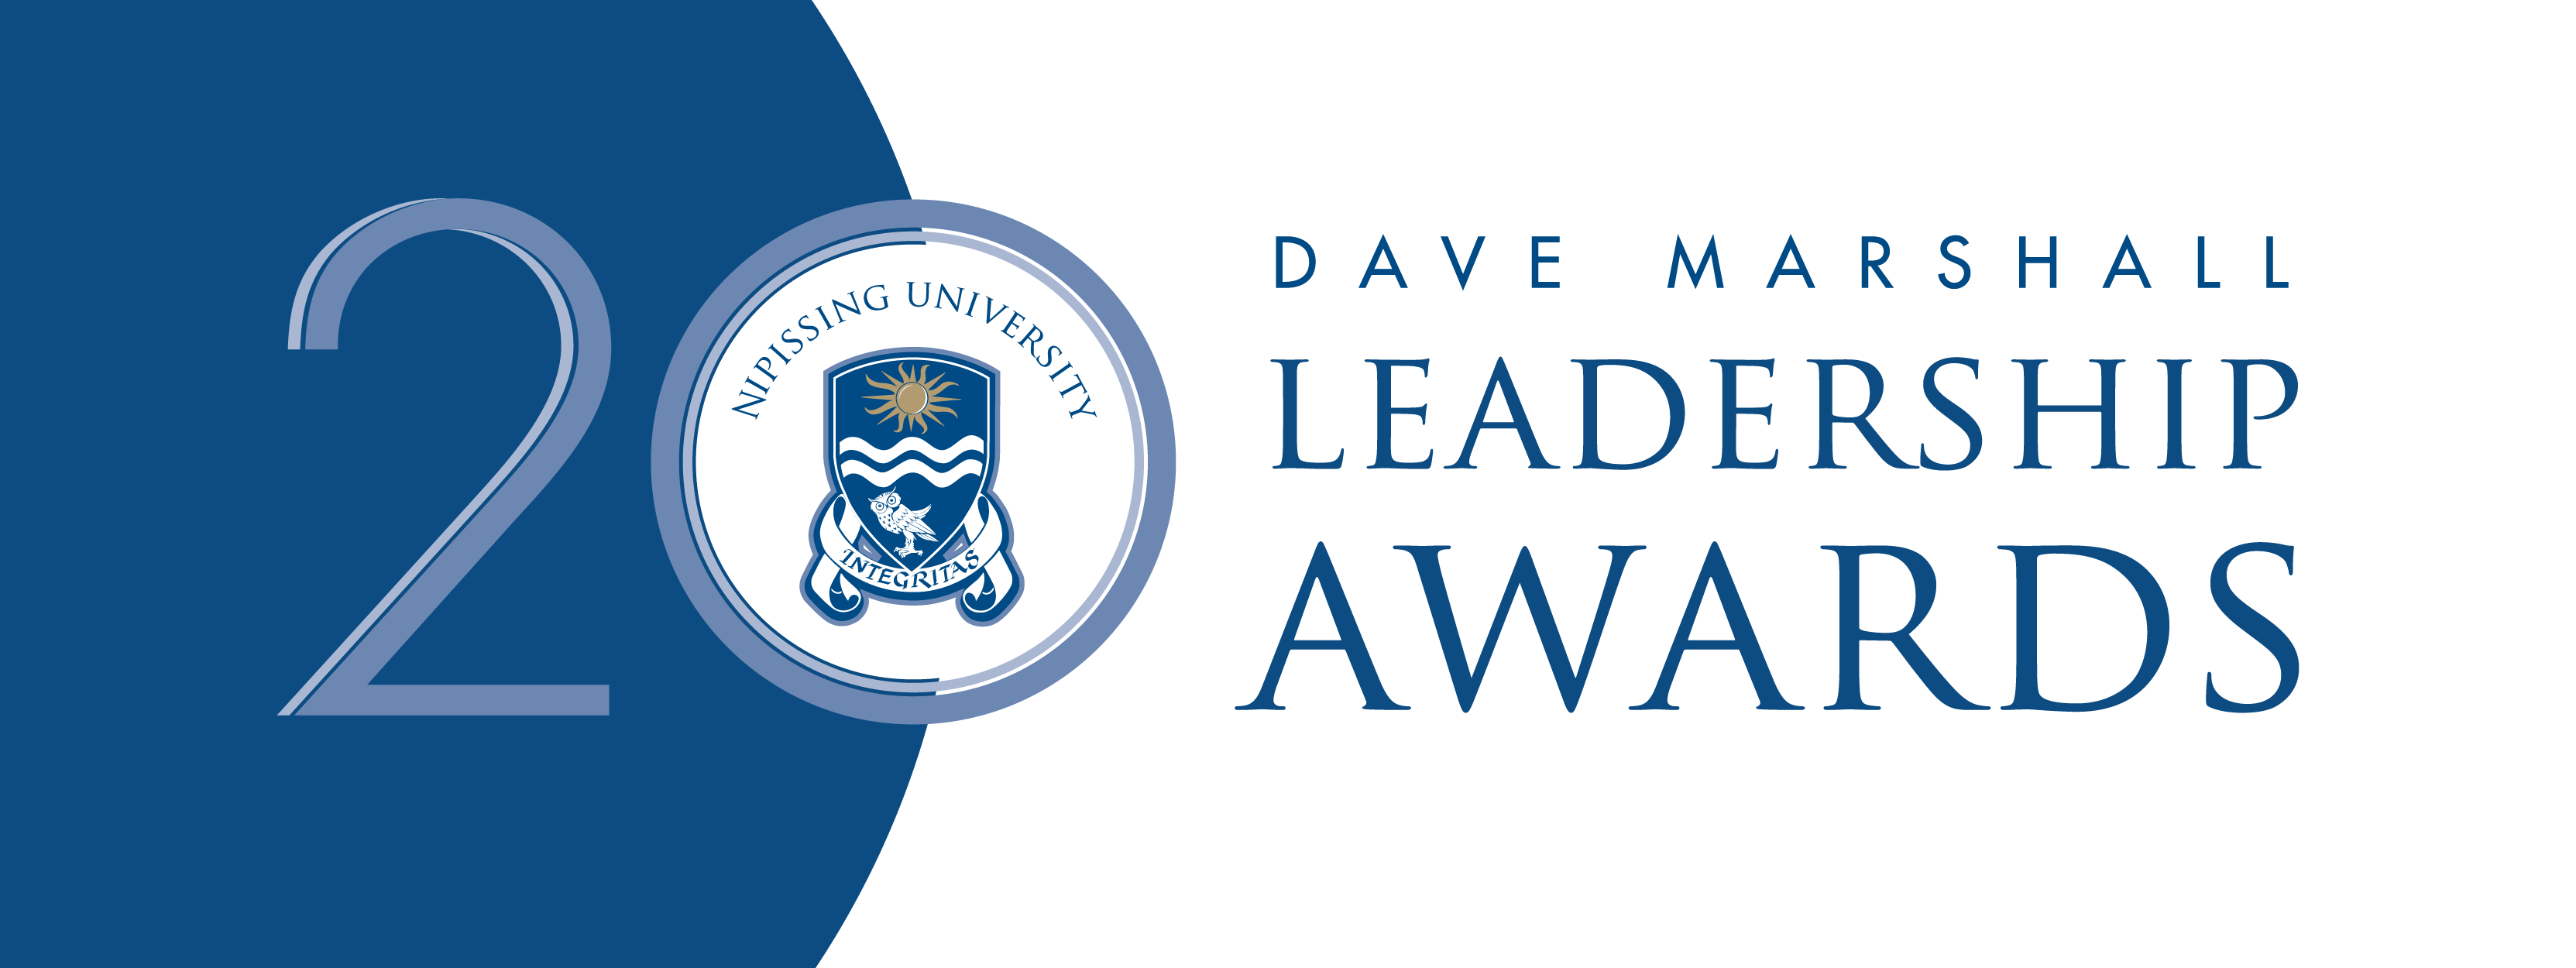 The image is a stylized 20th Anniversary Dave Marshall Leadership Awards logo